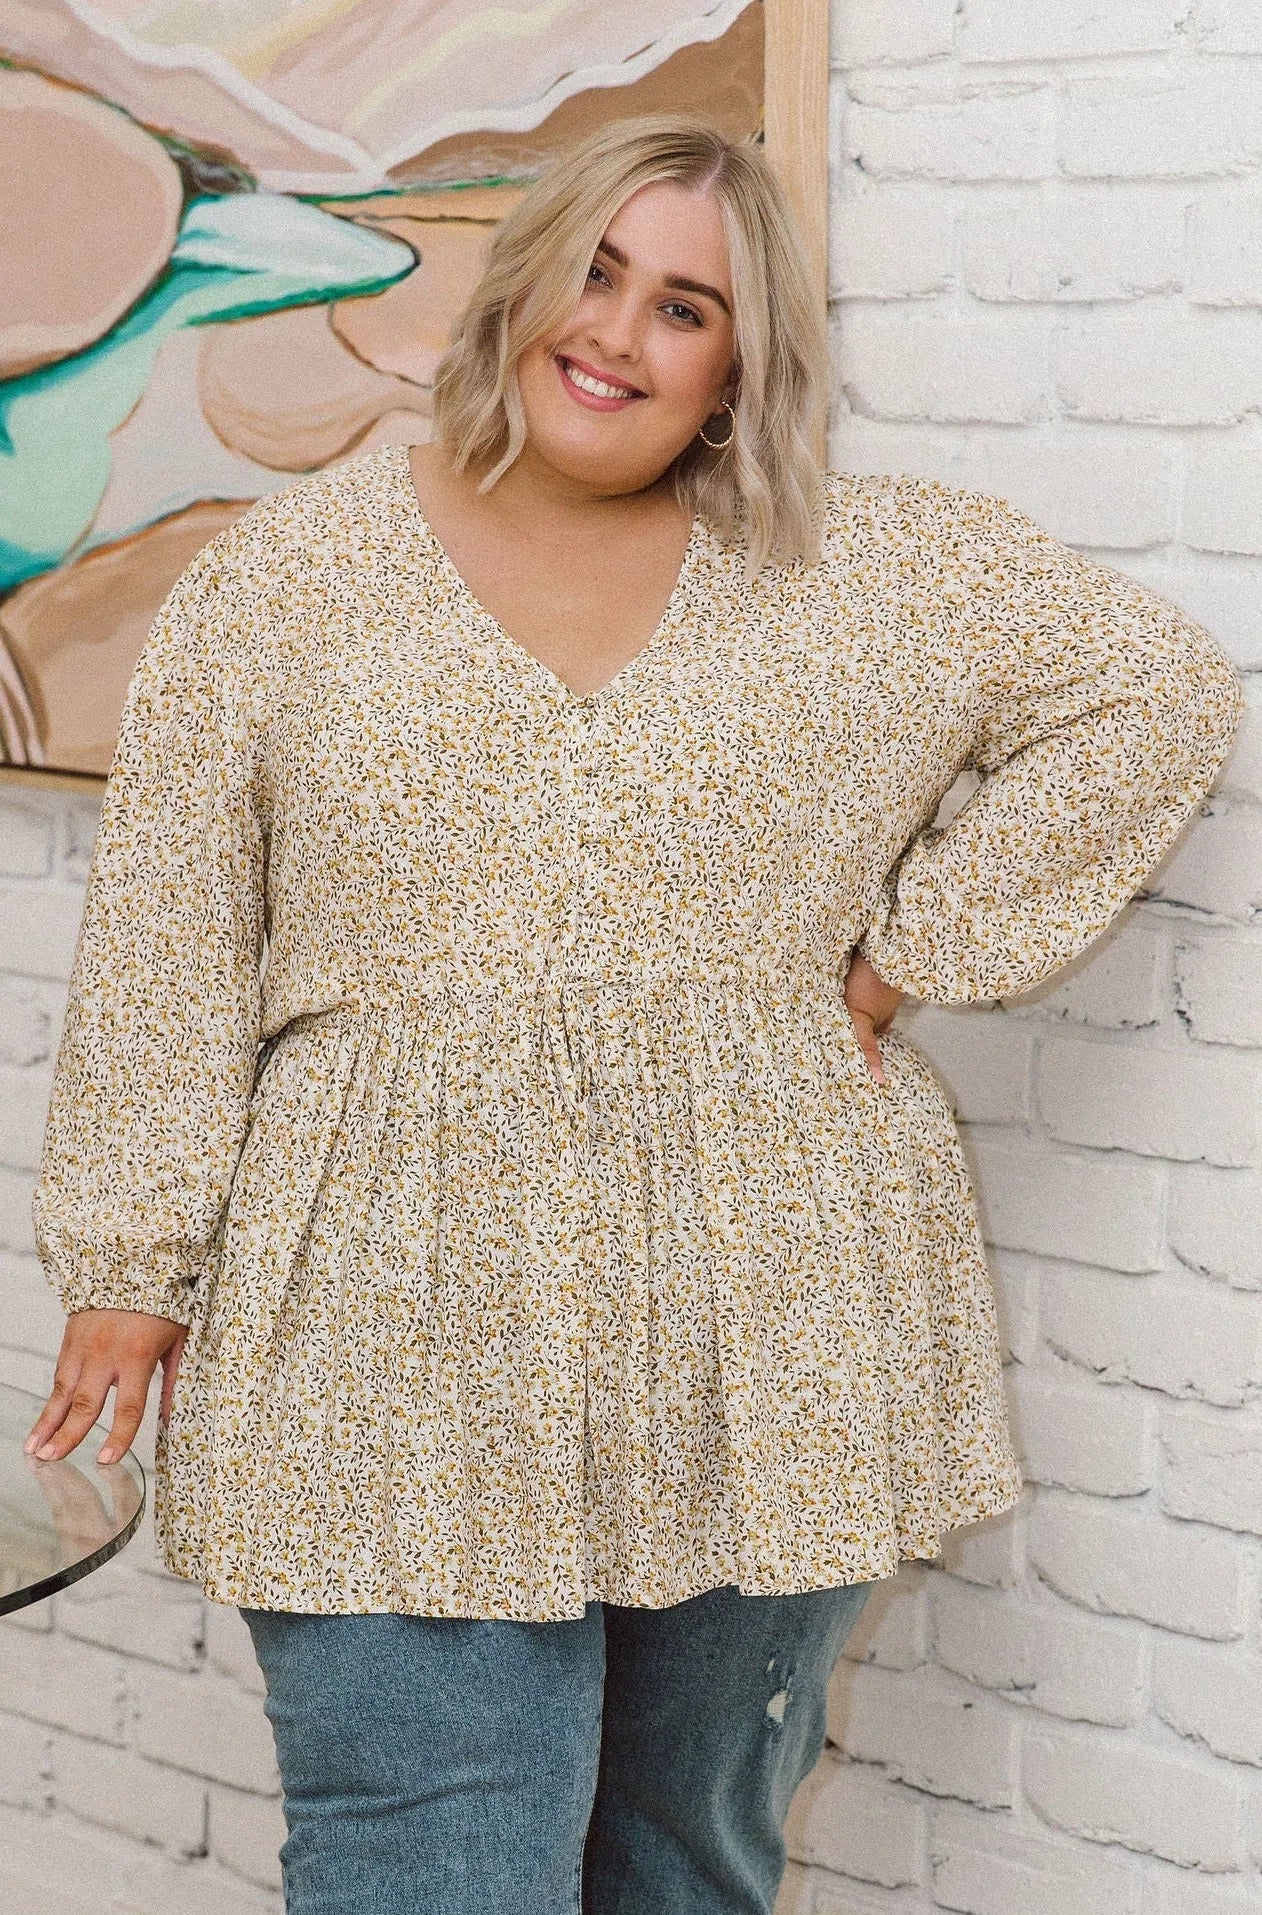 Plus Size fashion,  women modeling a Plus Size V-Neck Top - Embrace Chic Style with Isla Top in White Ditsy